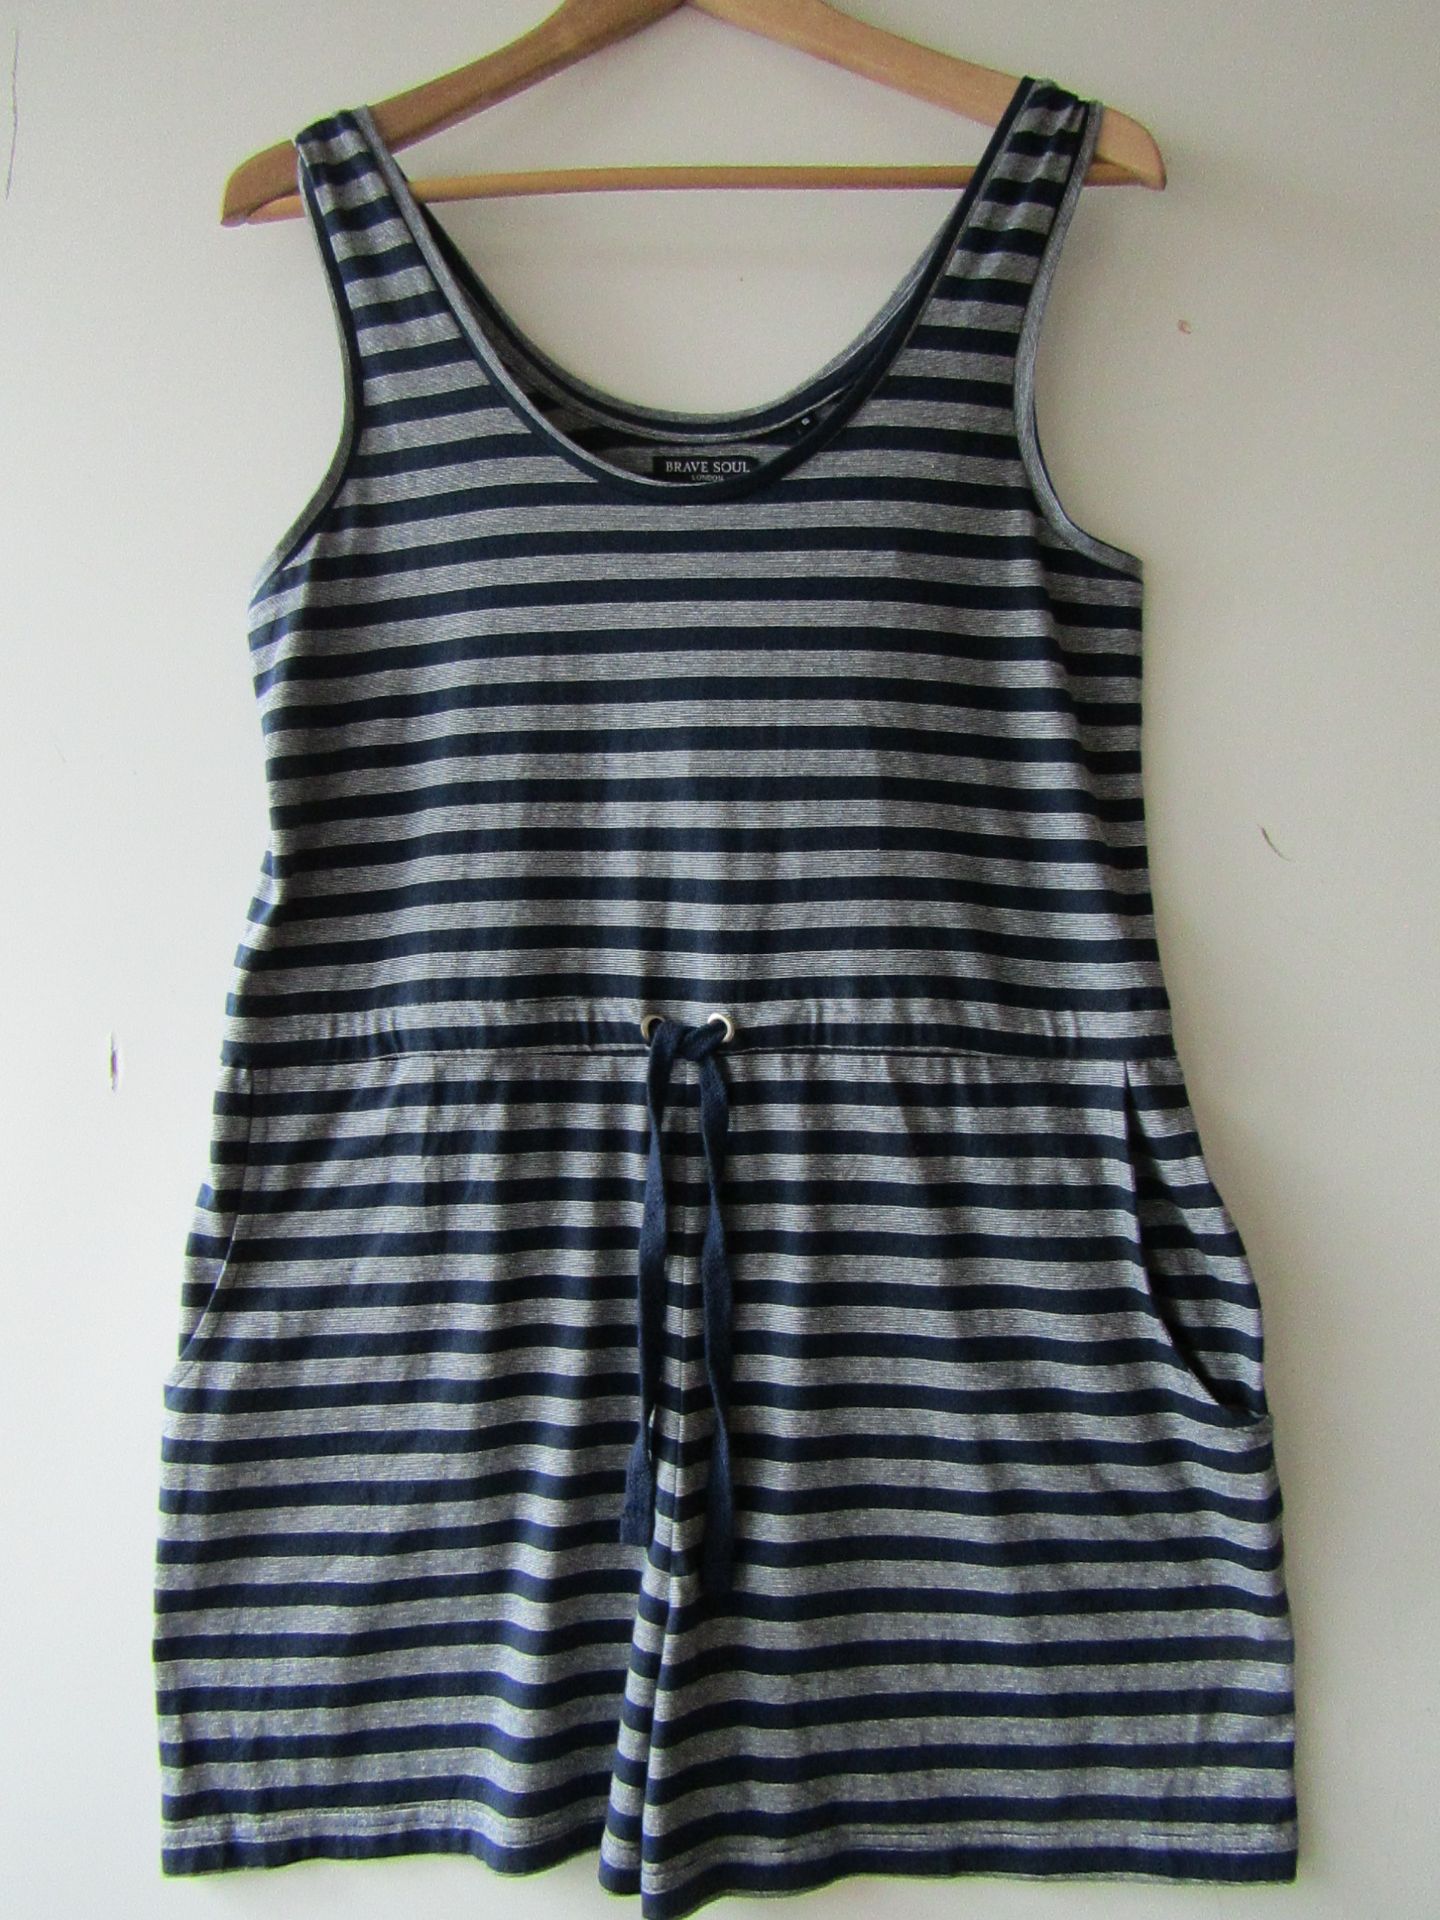 Ladies Brave Soul Striped Play suit. New Sample with tags. Size S